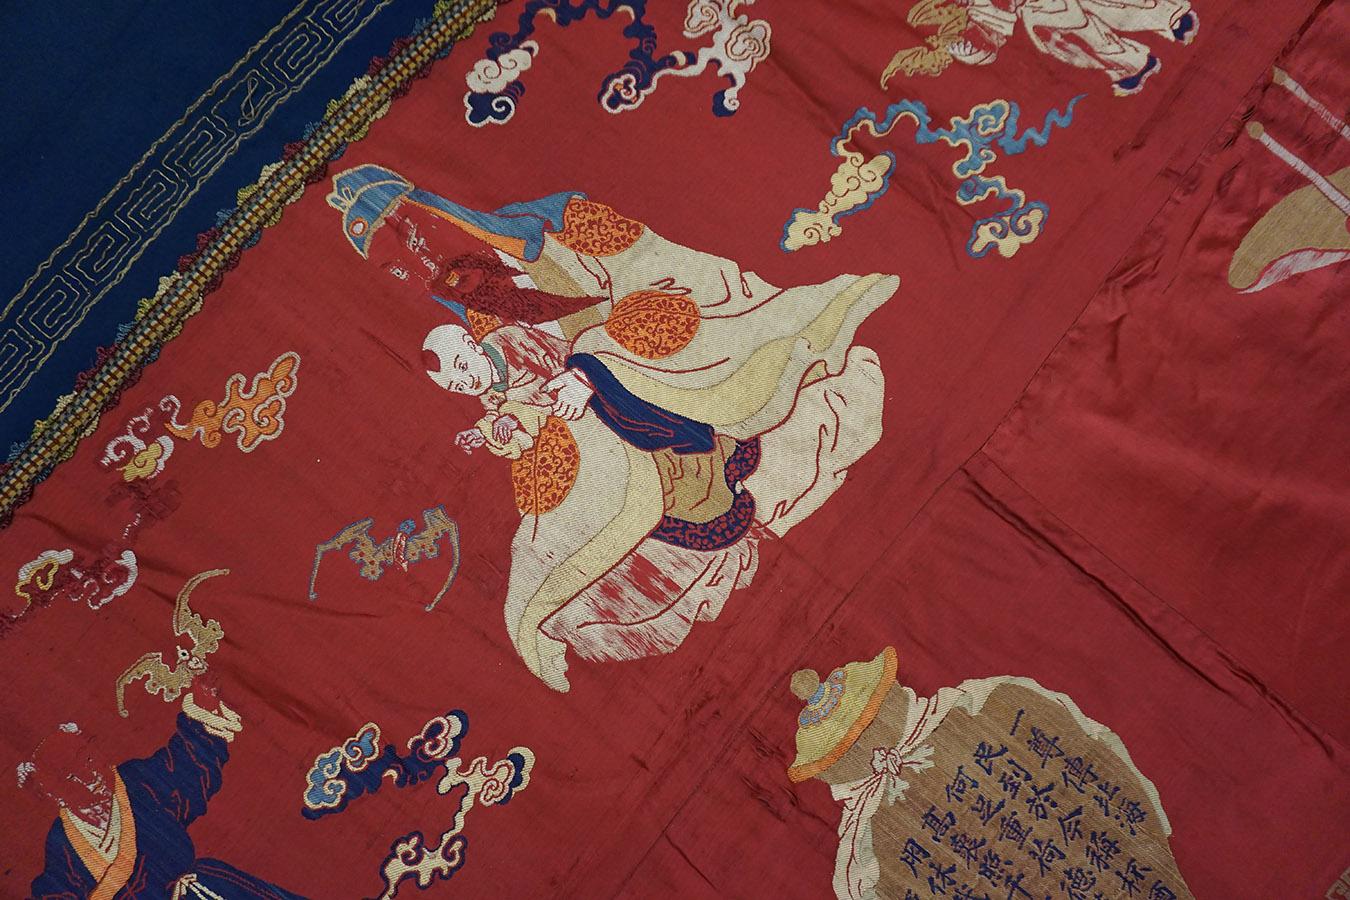 19th Century Chinese Pictorial Embroidery Textile (3' 6'' x 11' 4'' - 107 x 345) For Sale 2